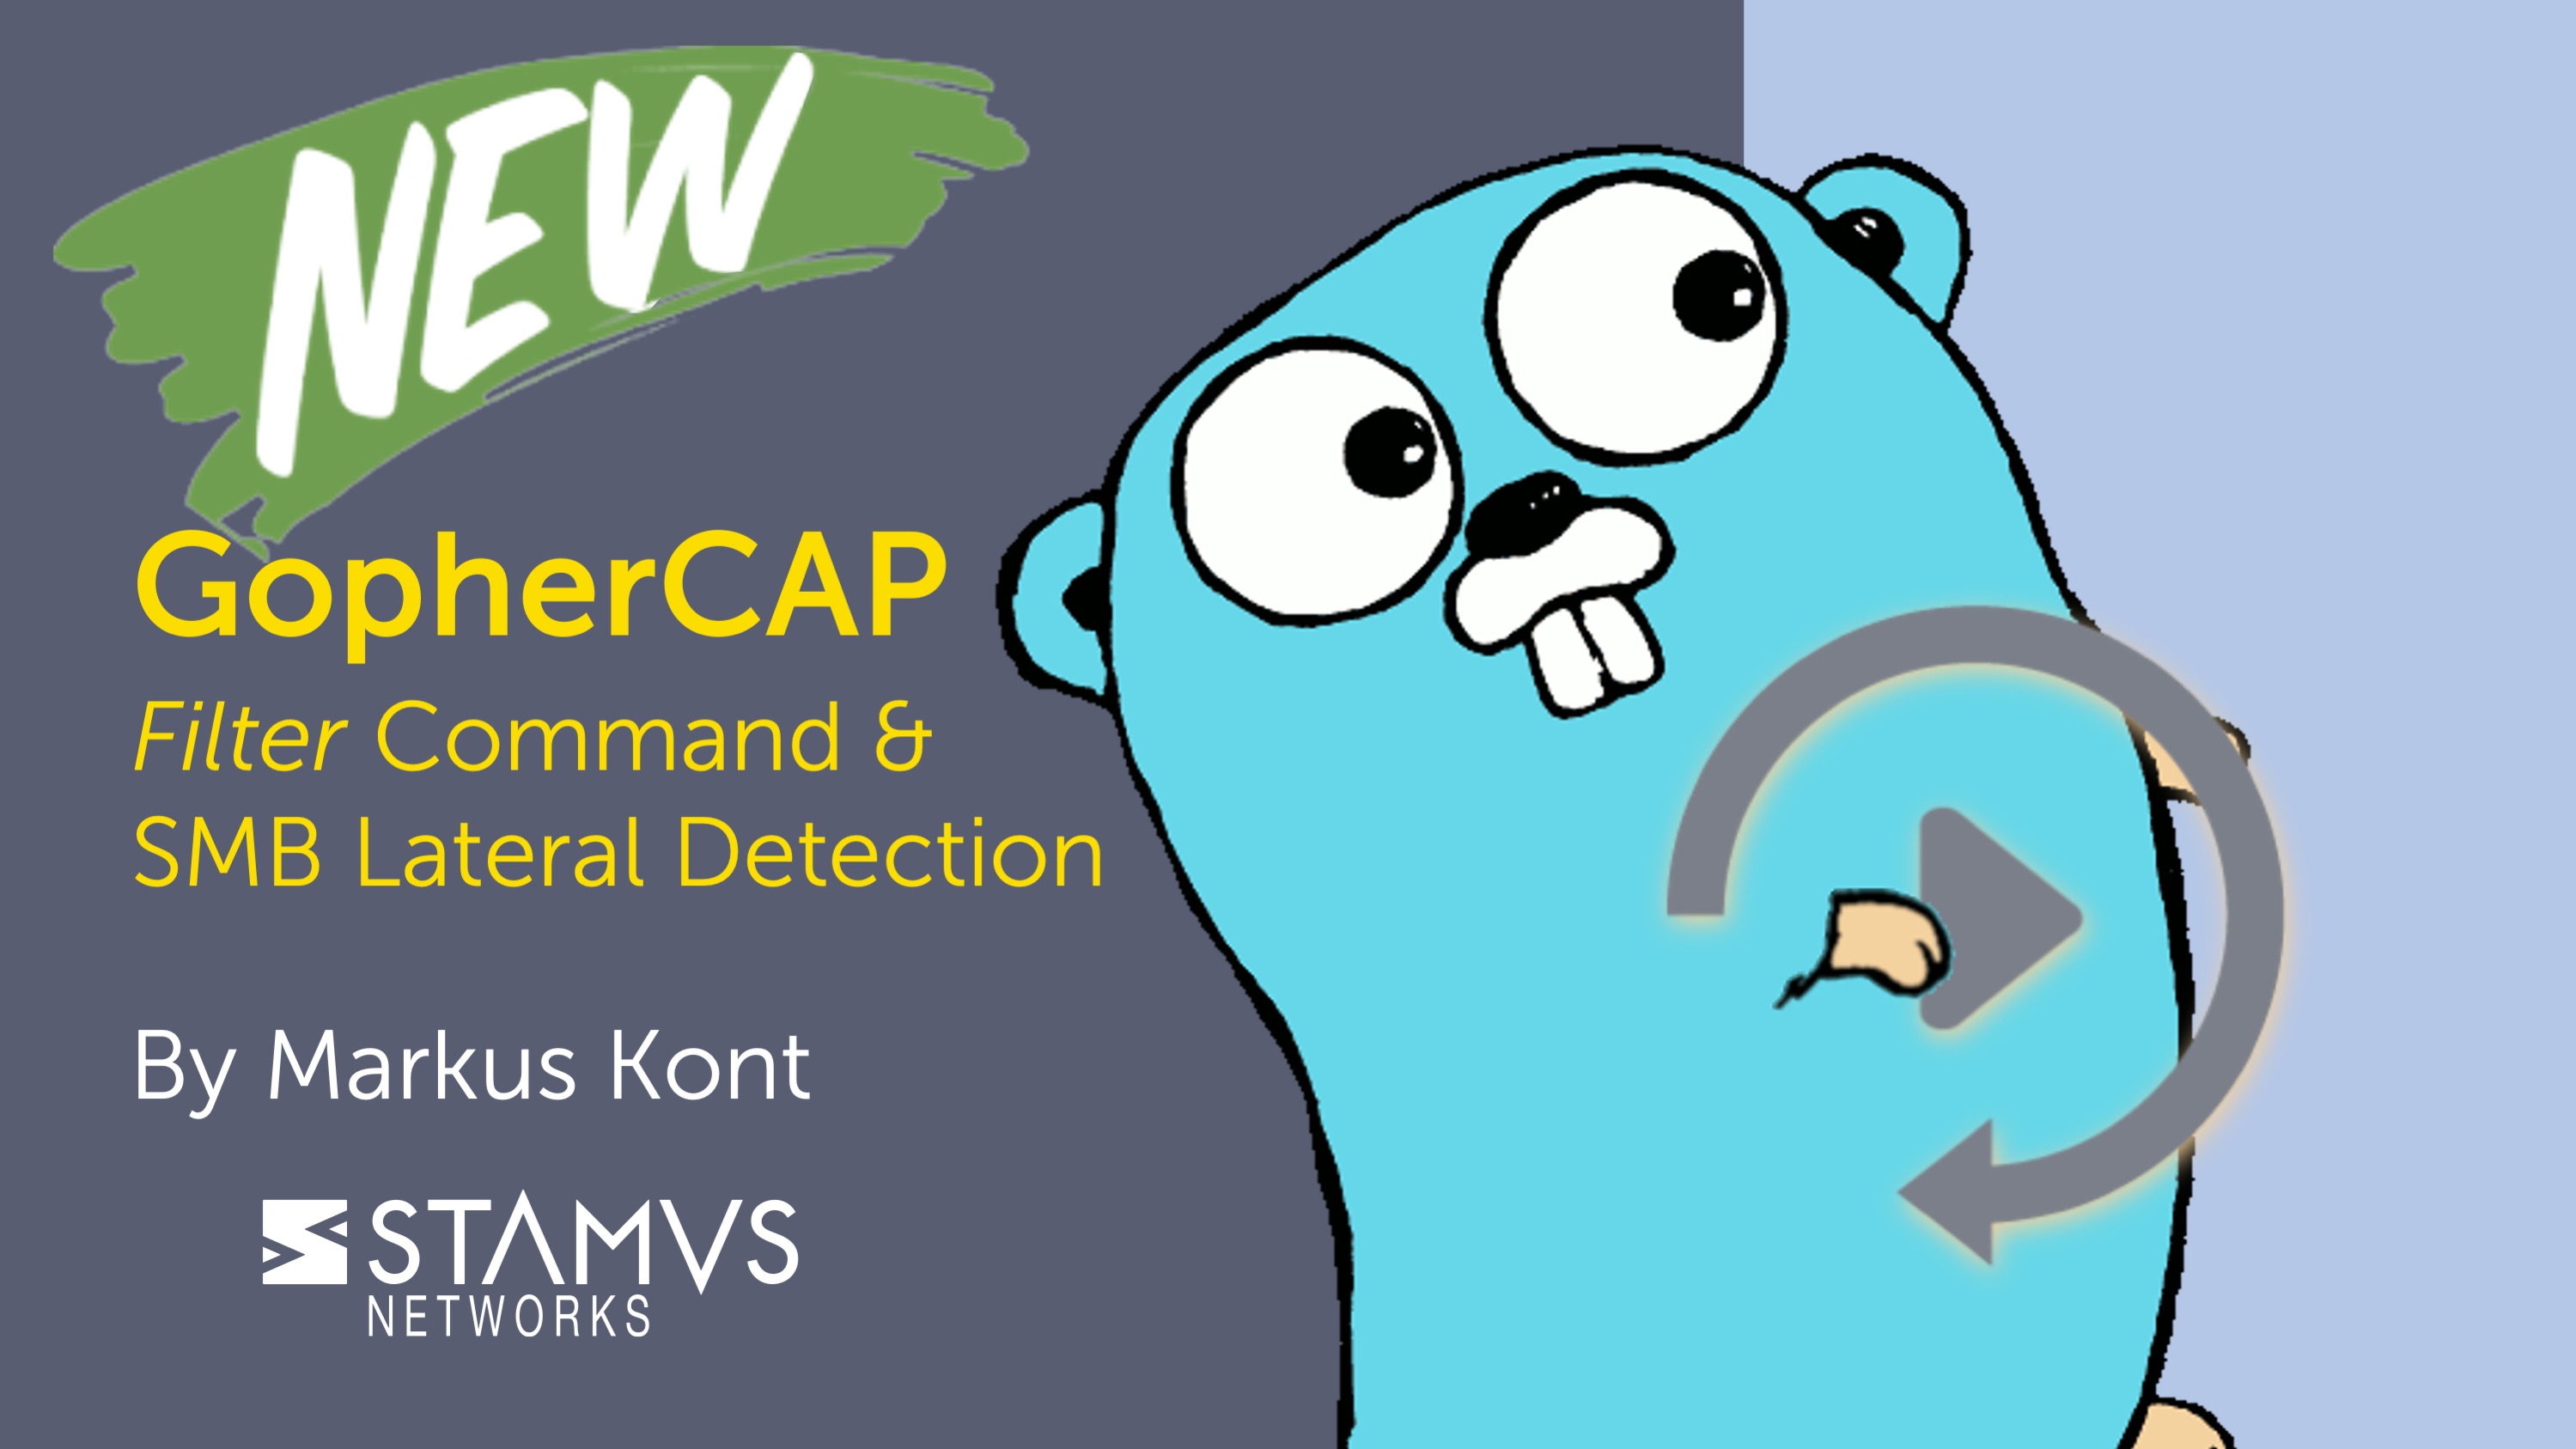 GopherCAP Update: Filtering and SMB Lateral Detection Research